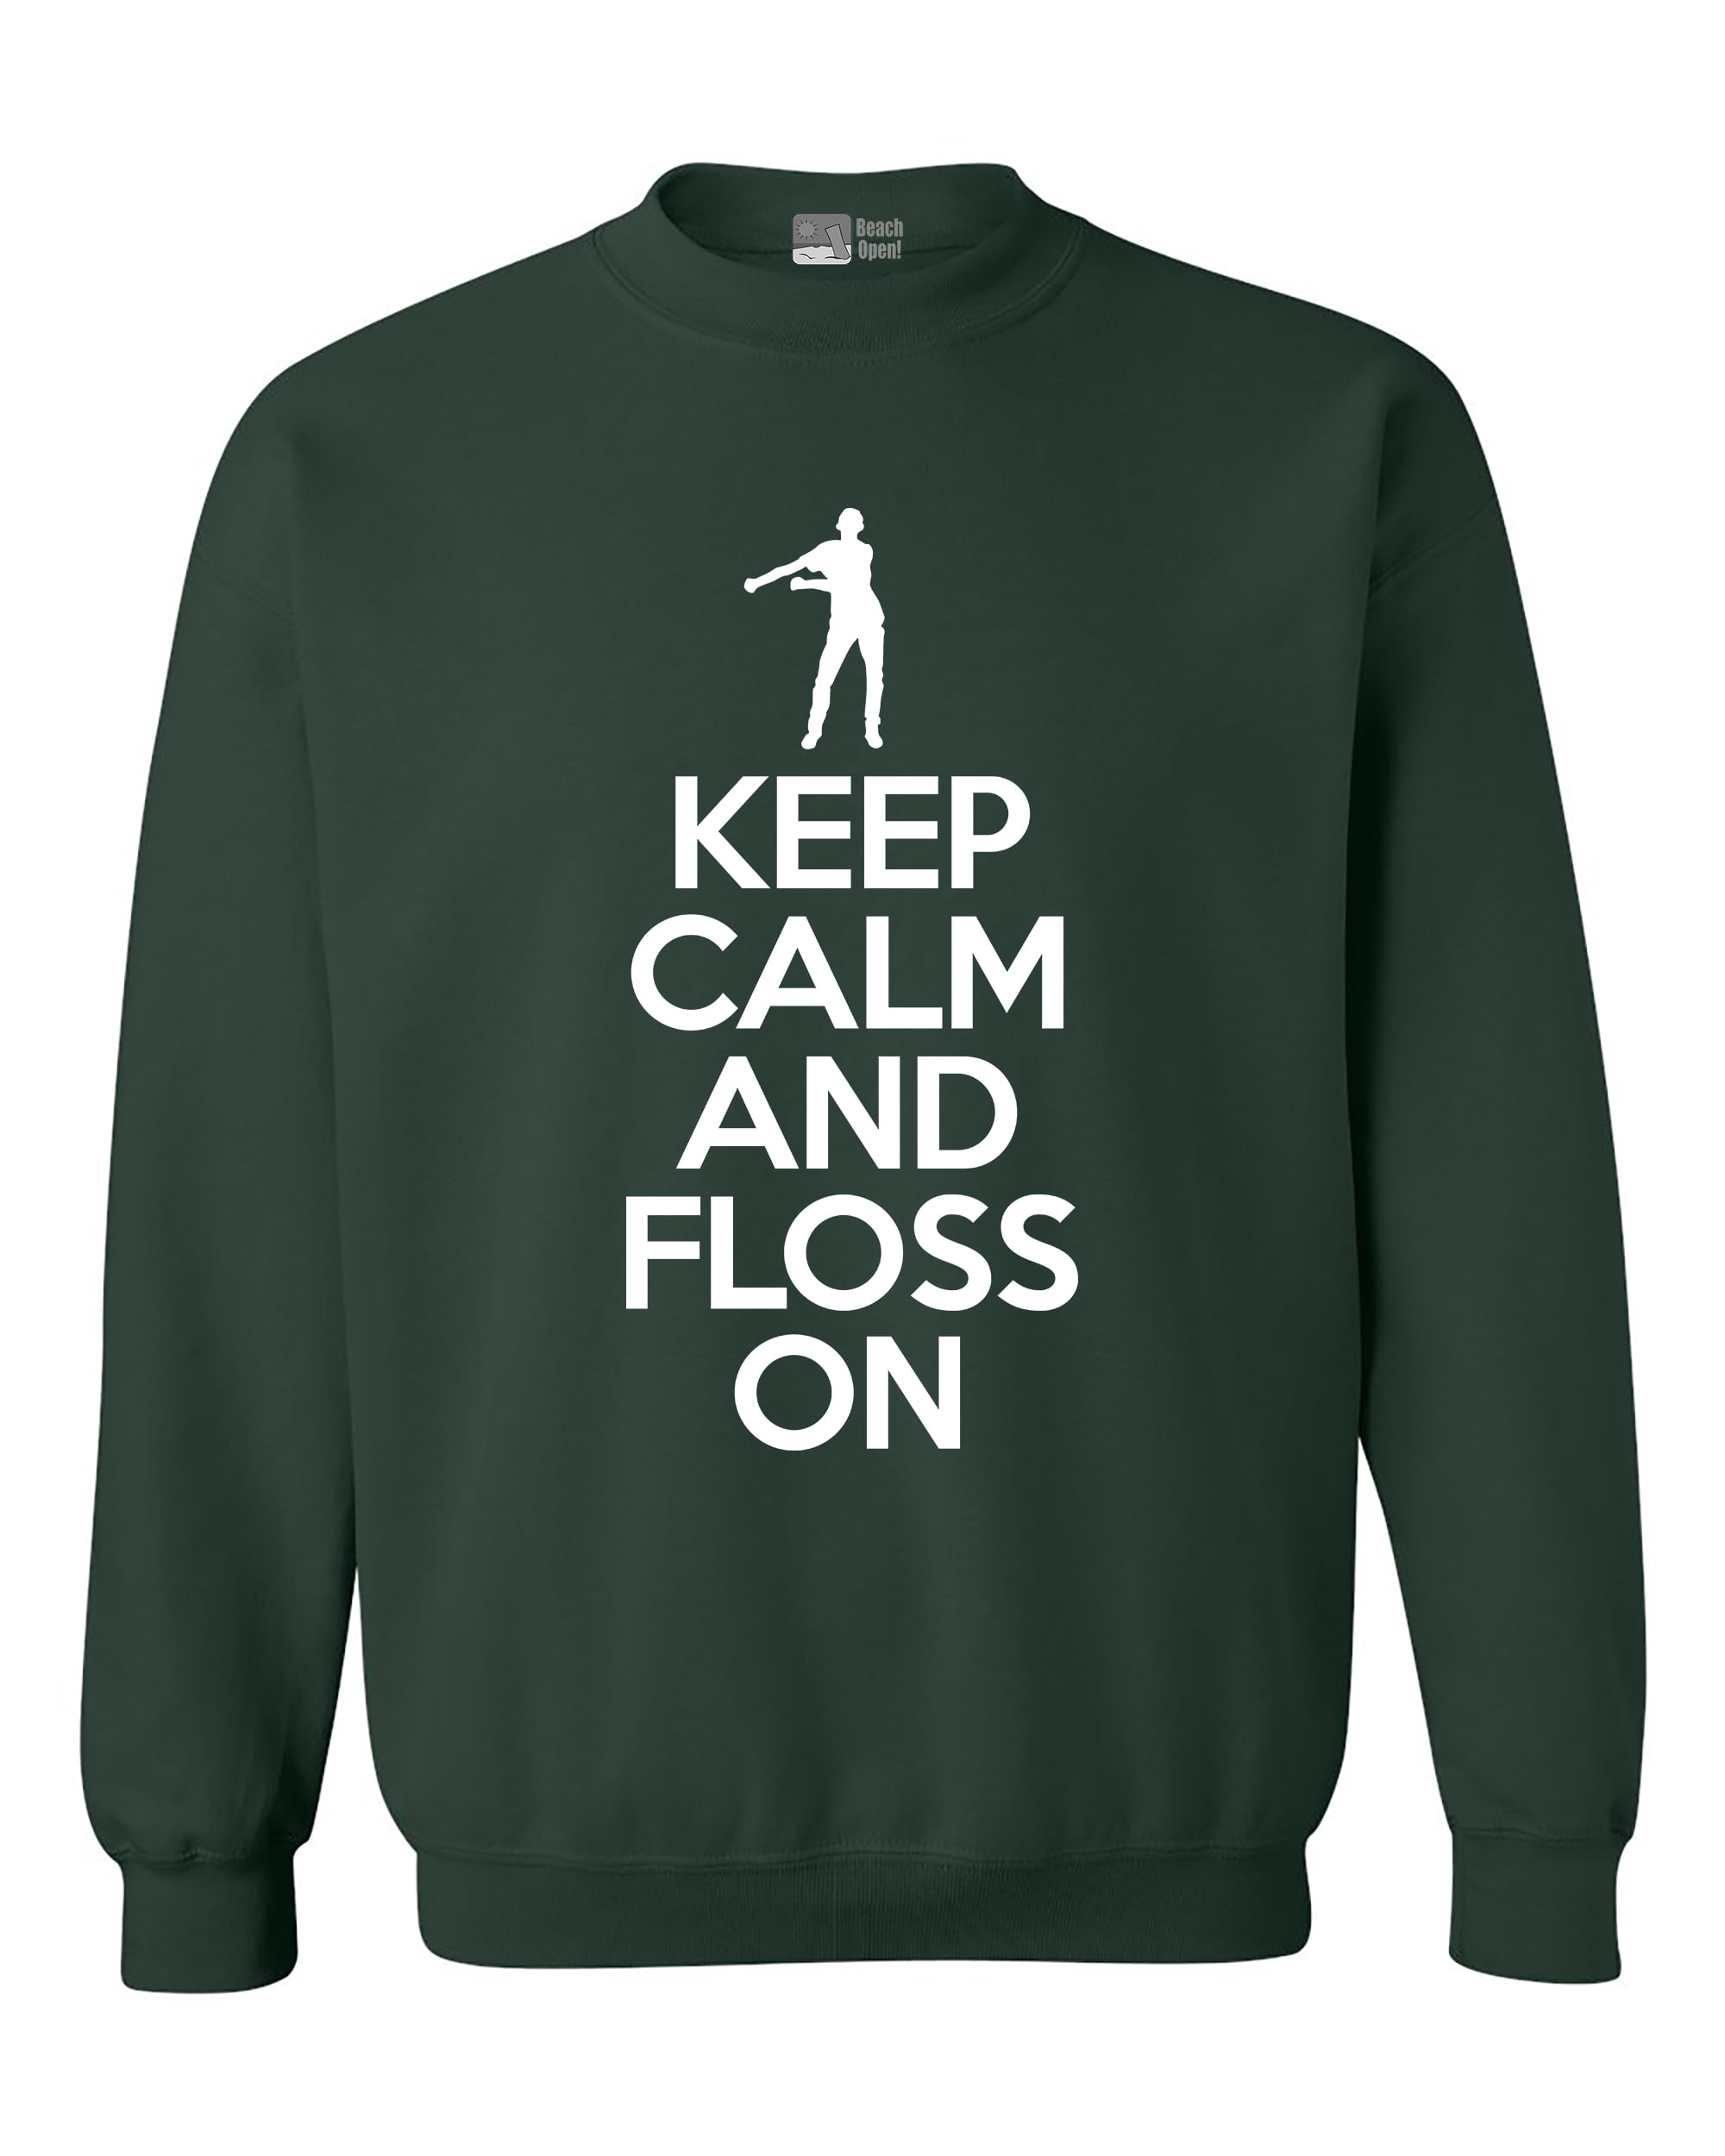 Short-Sleeve Unisex T-Shirt Funny Flossing Lover Floss Party Top Dance Lover Tee Flossing Humor Shirt Keep Calm And Floss T-Shirt